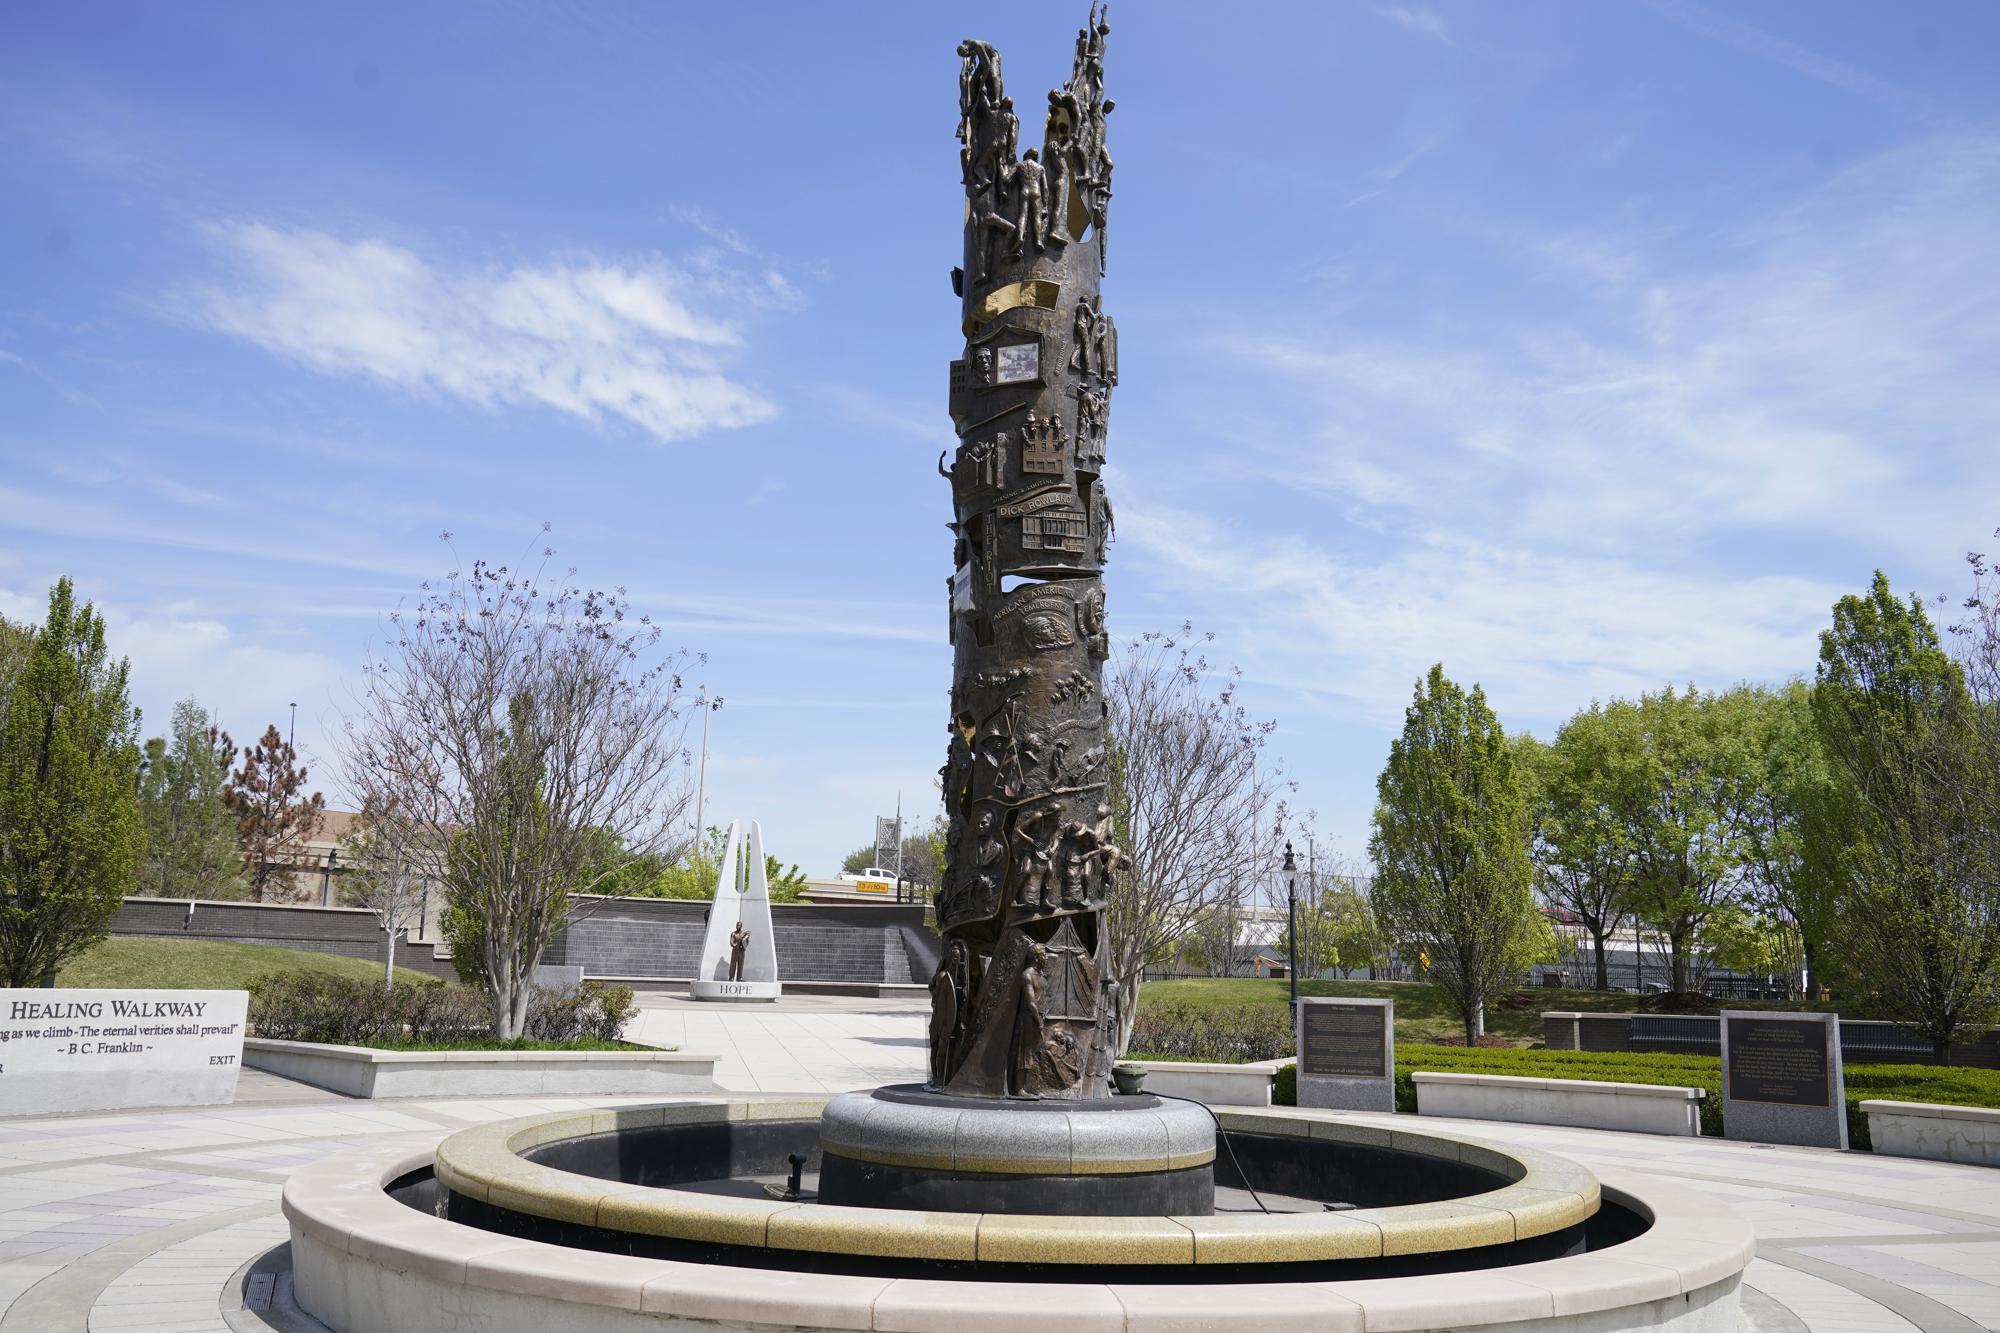 A sculpture in John Hope Franklin Reconciliation Park is pictured Wednesday, April 14, 2021, in Tulsa, Okla. (AP Photo/Sue Ogrocki)